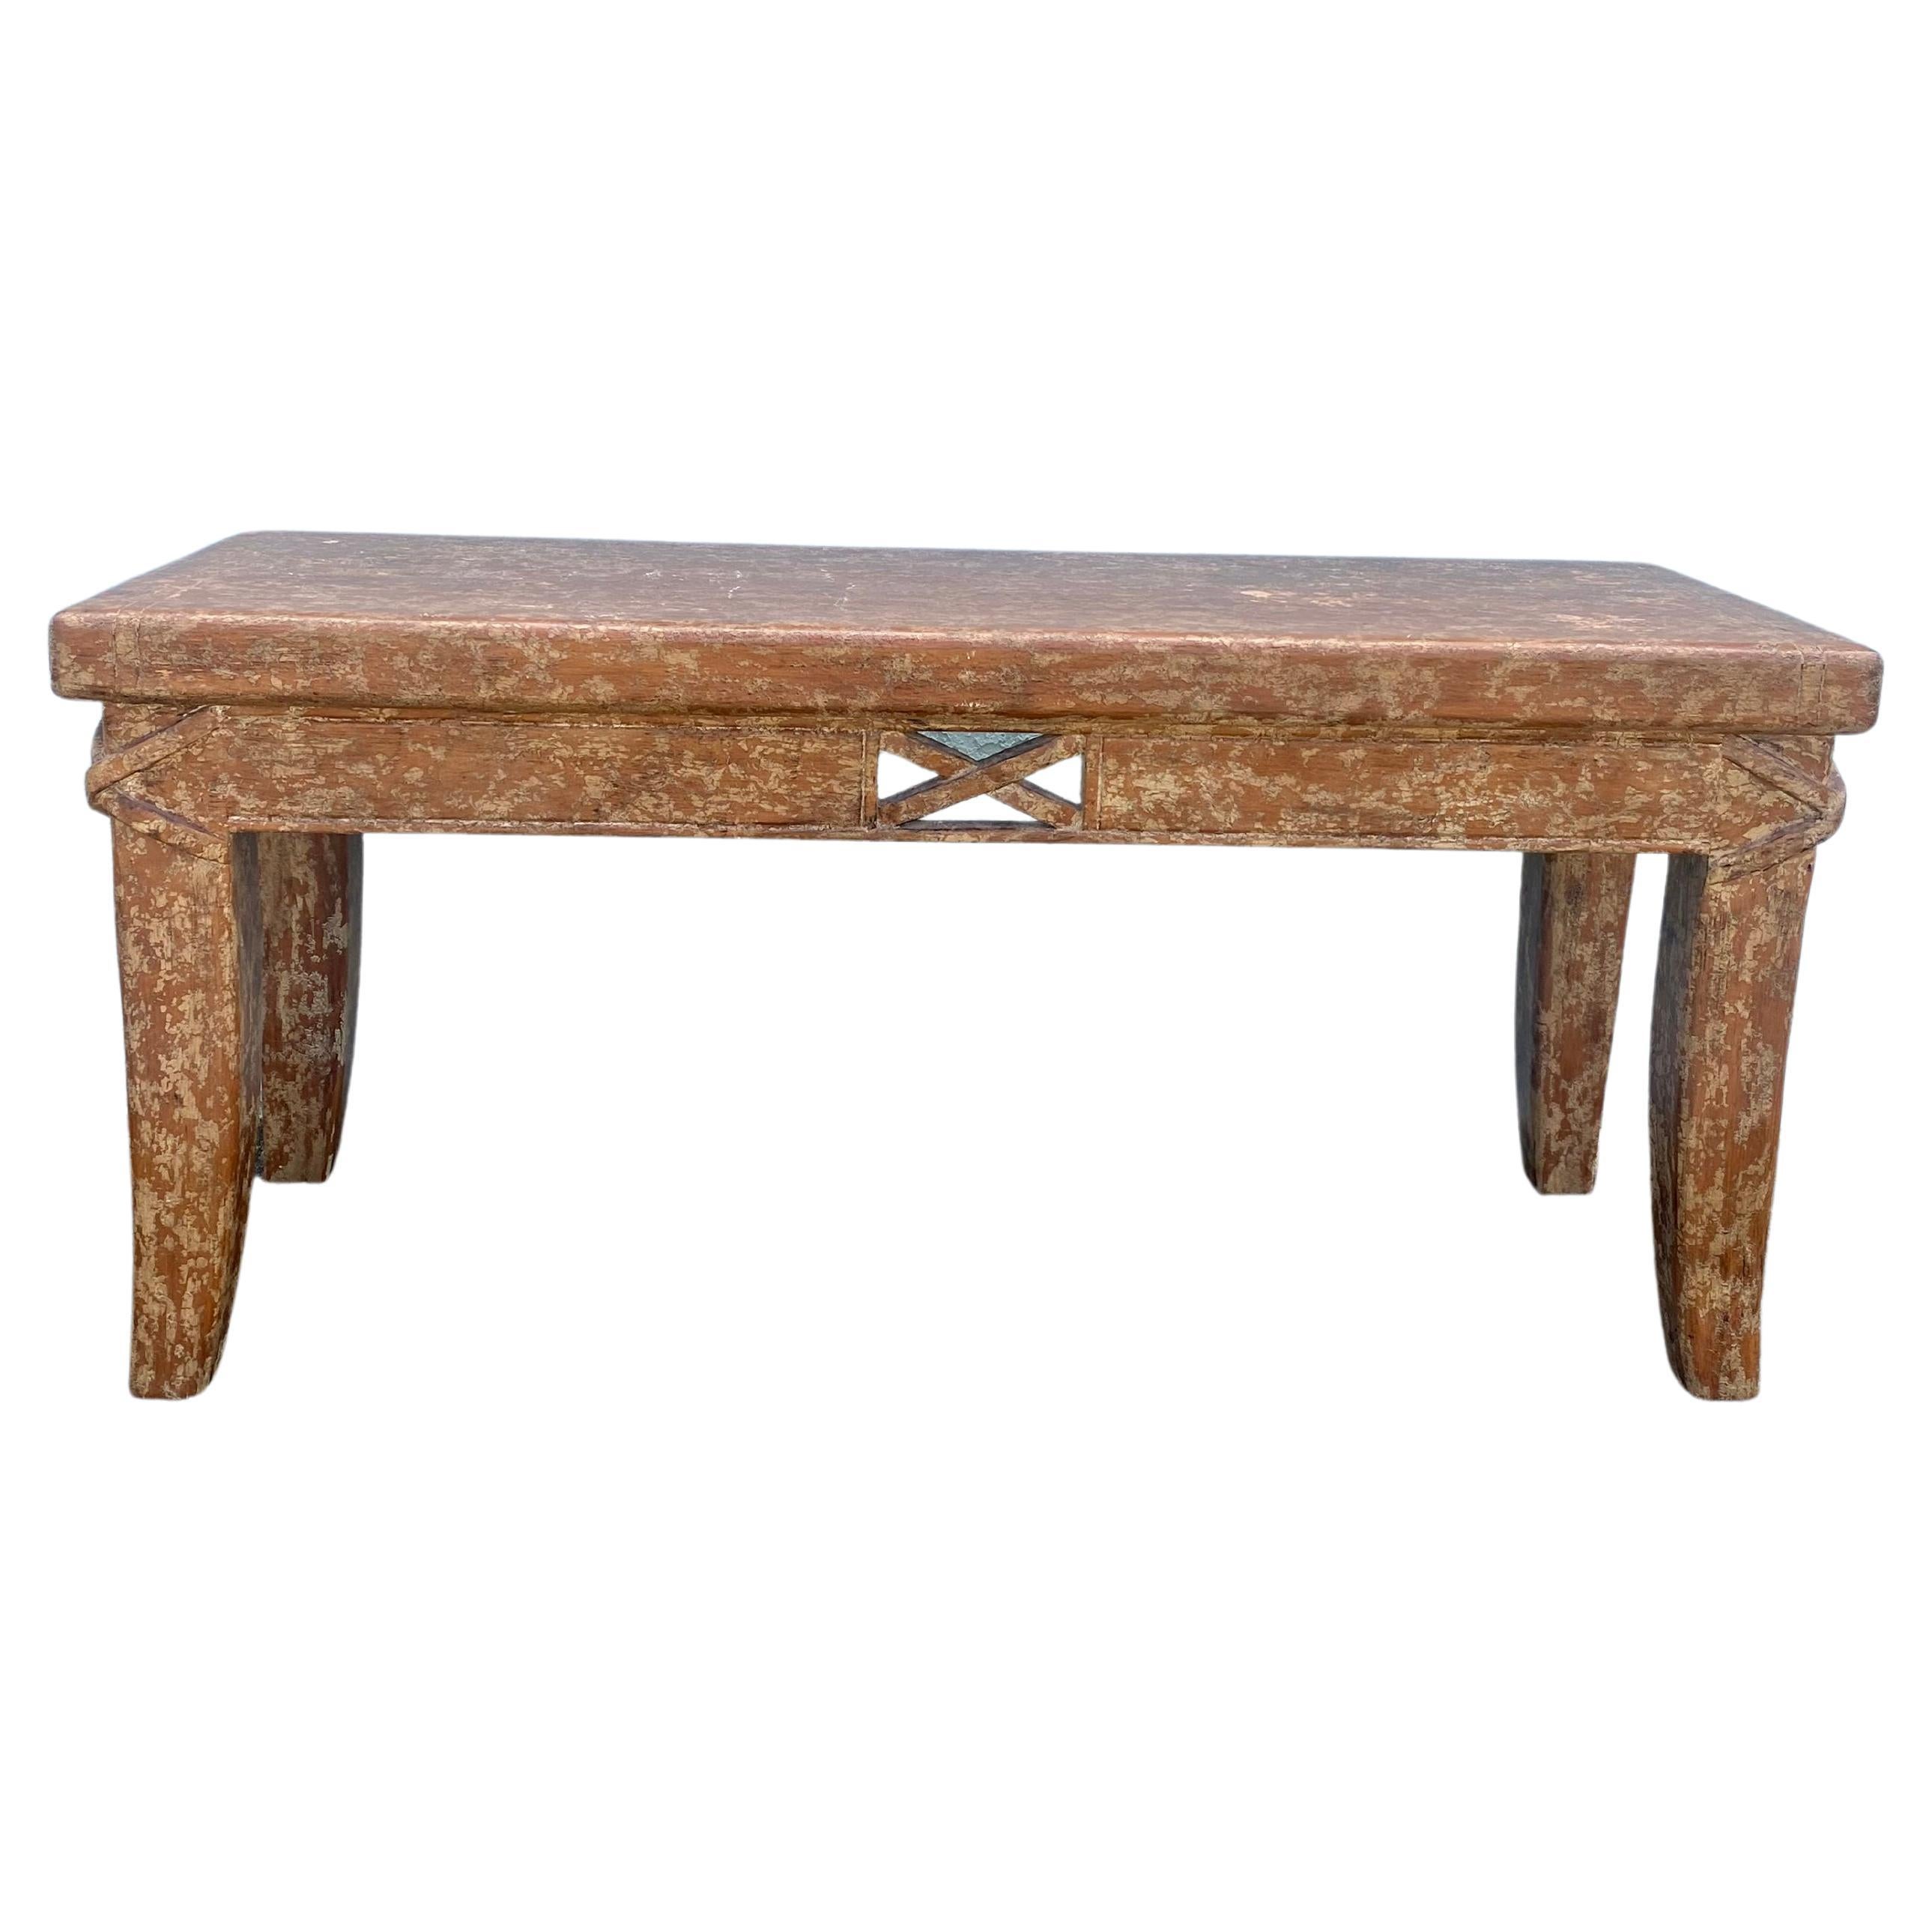 1940s Artistic Salmon Carved Textured Rustic Farmhouse Wood Console Table Desk For Sale